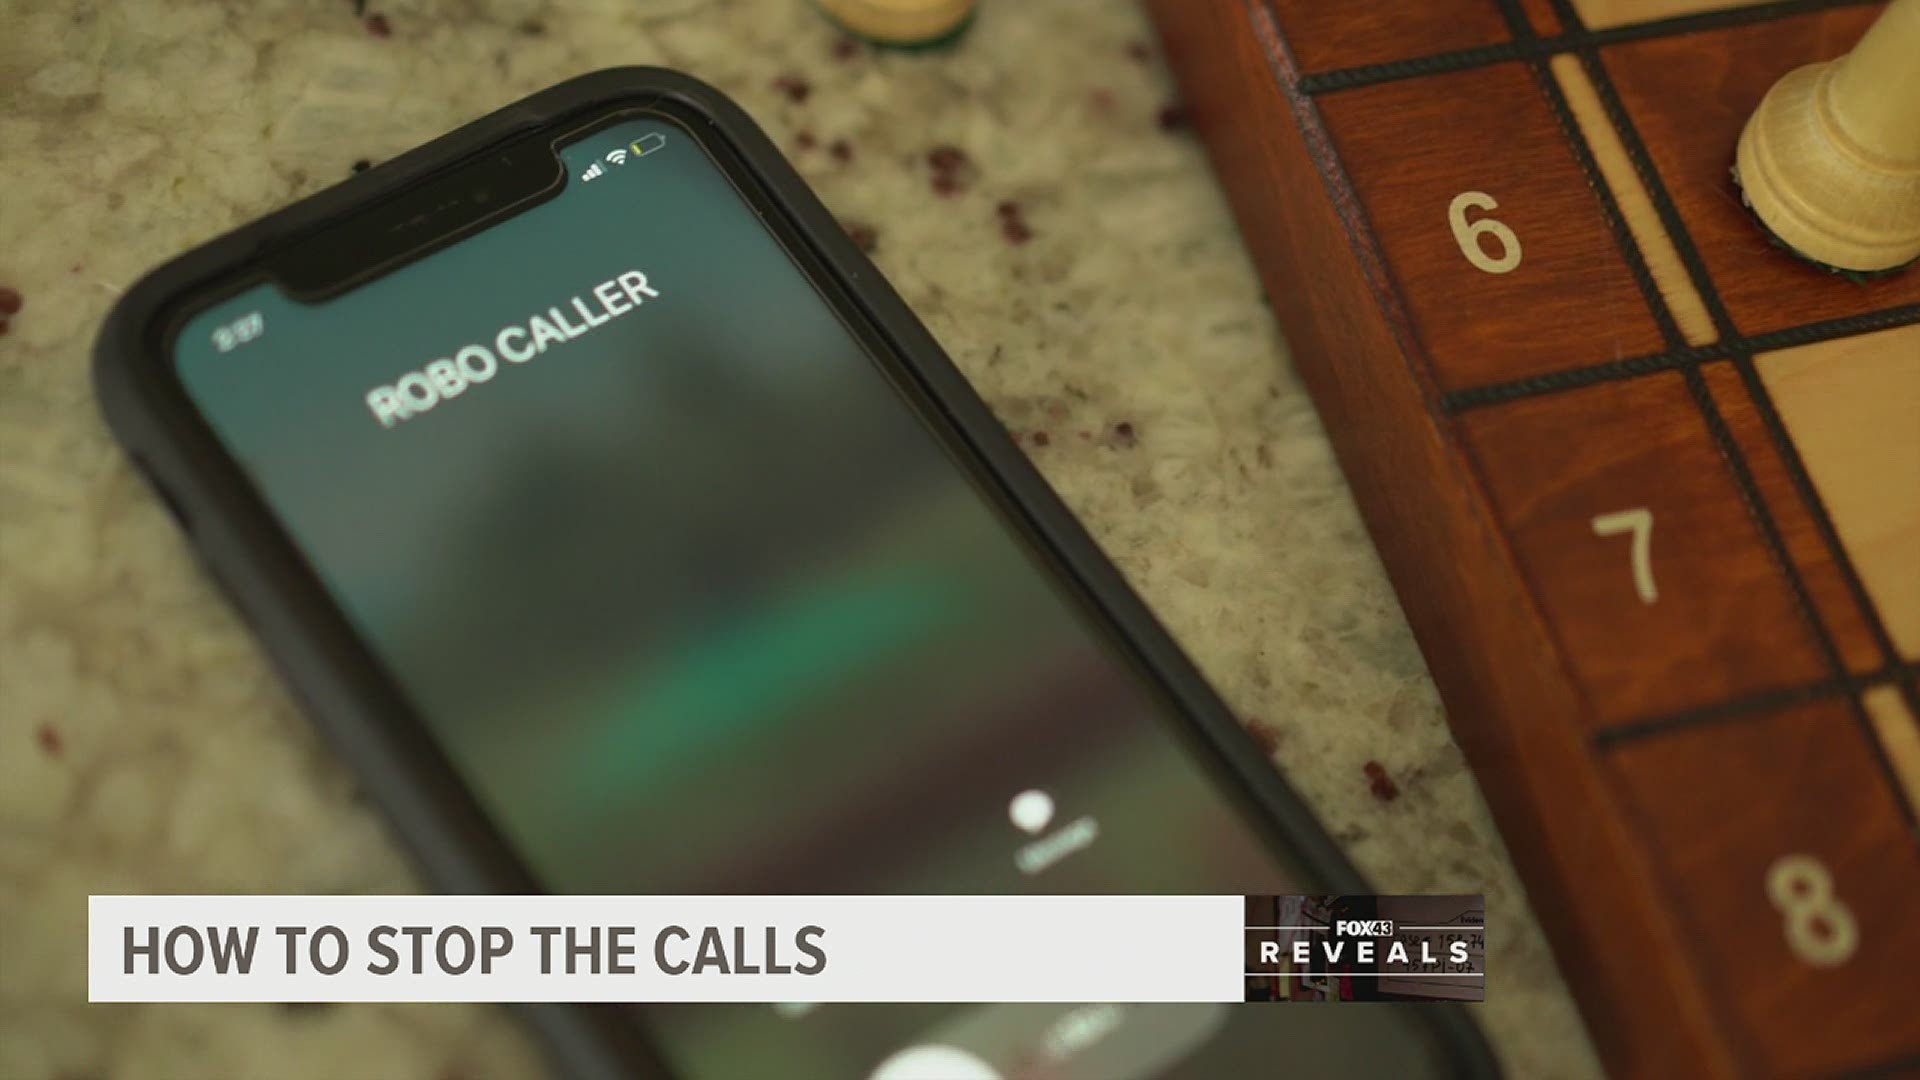 In the month of April, Pennsylvanians tried to dodge around 160 million robocalls. Consumers can outsmart scammers with these simple tips.